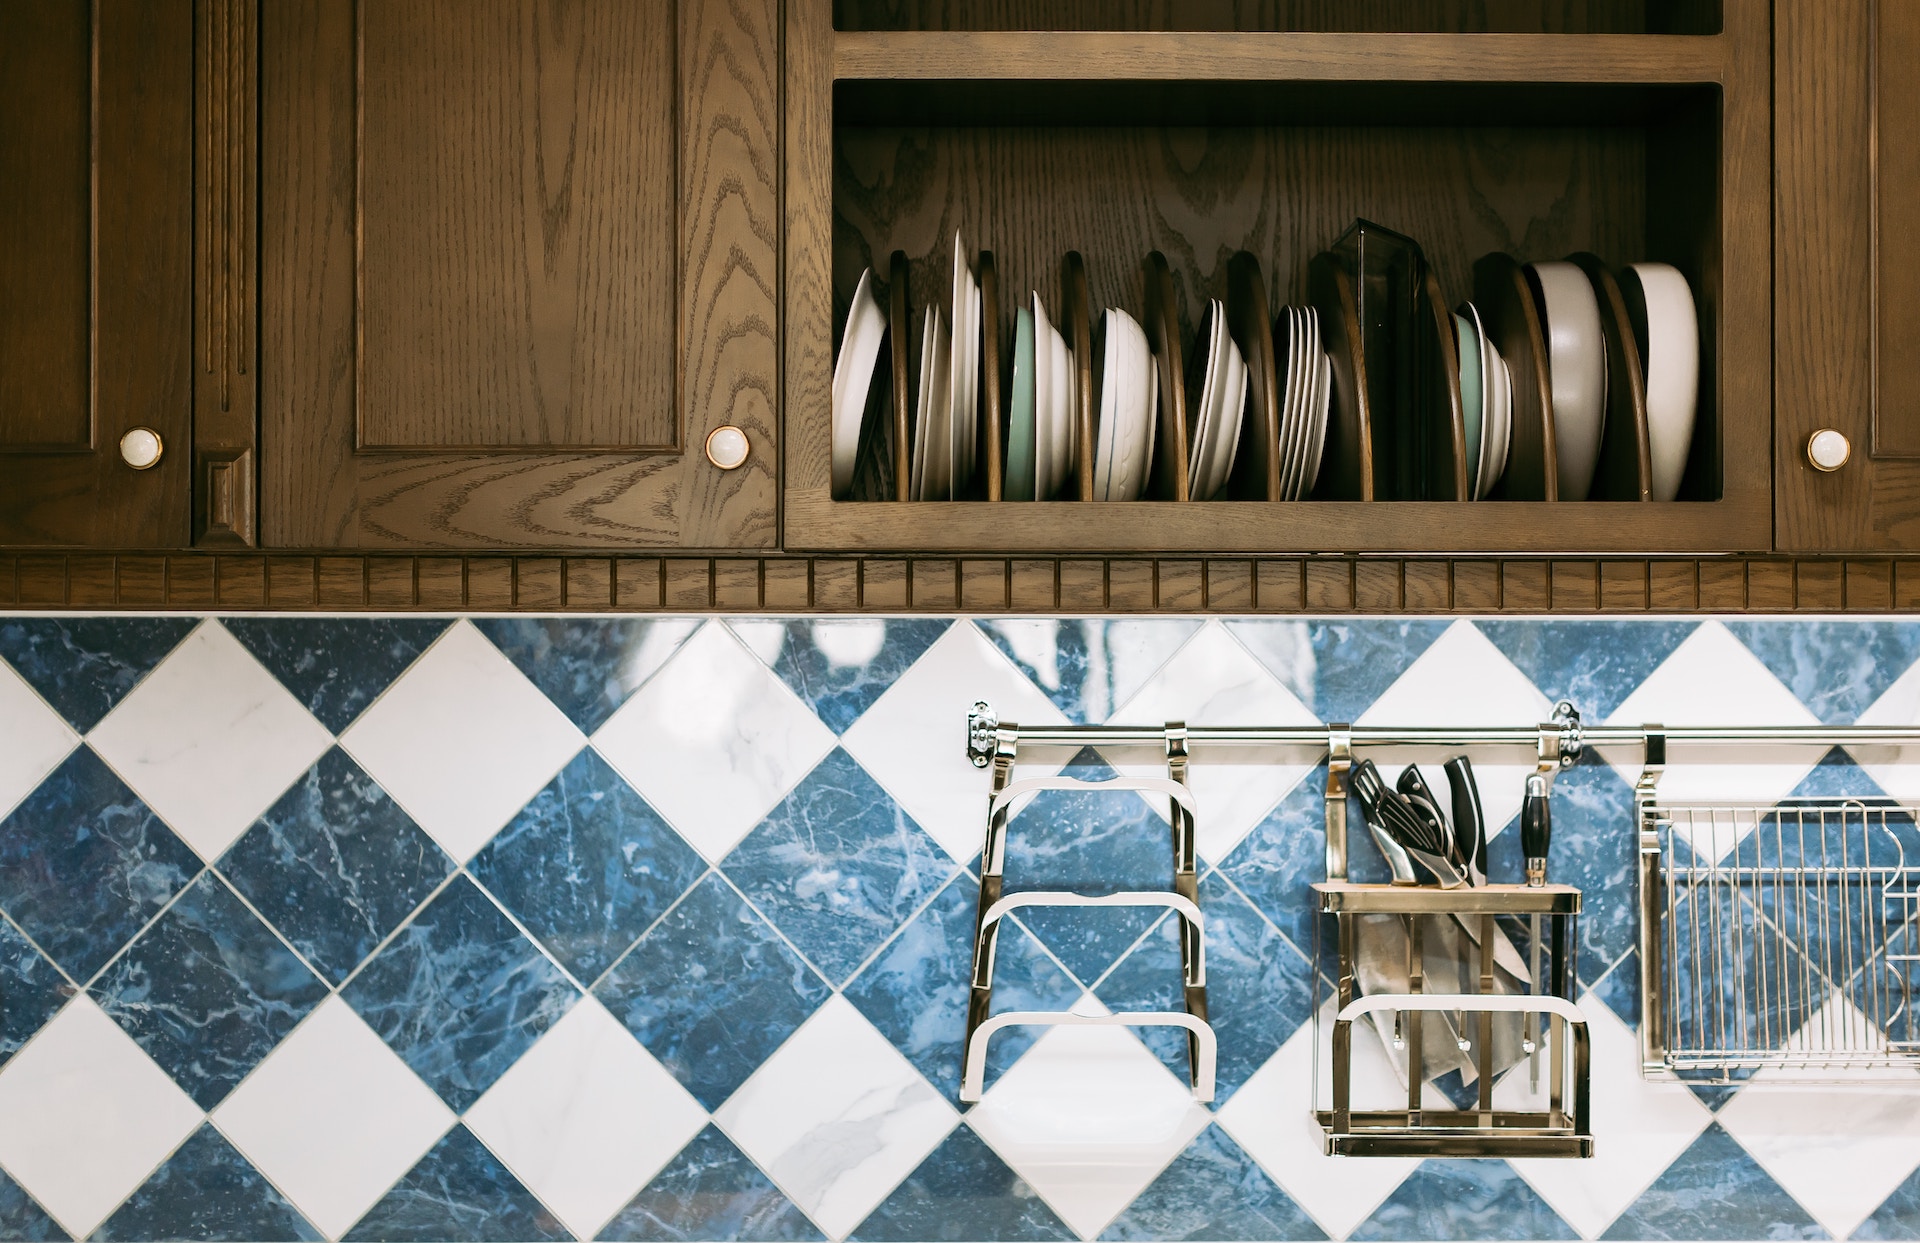 Open shelving in a kitchen that shows off vertical stacks of dishes and silverware above a decorative tile backsplash